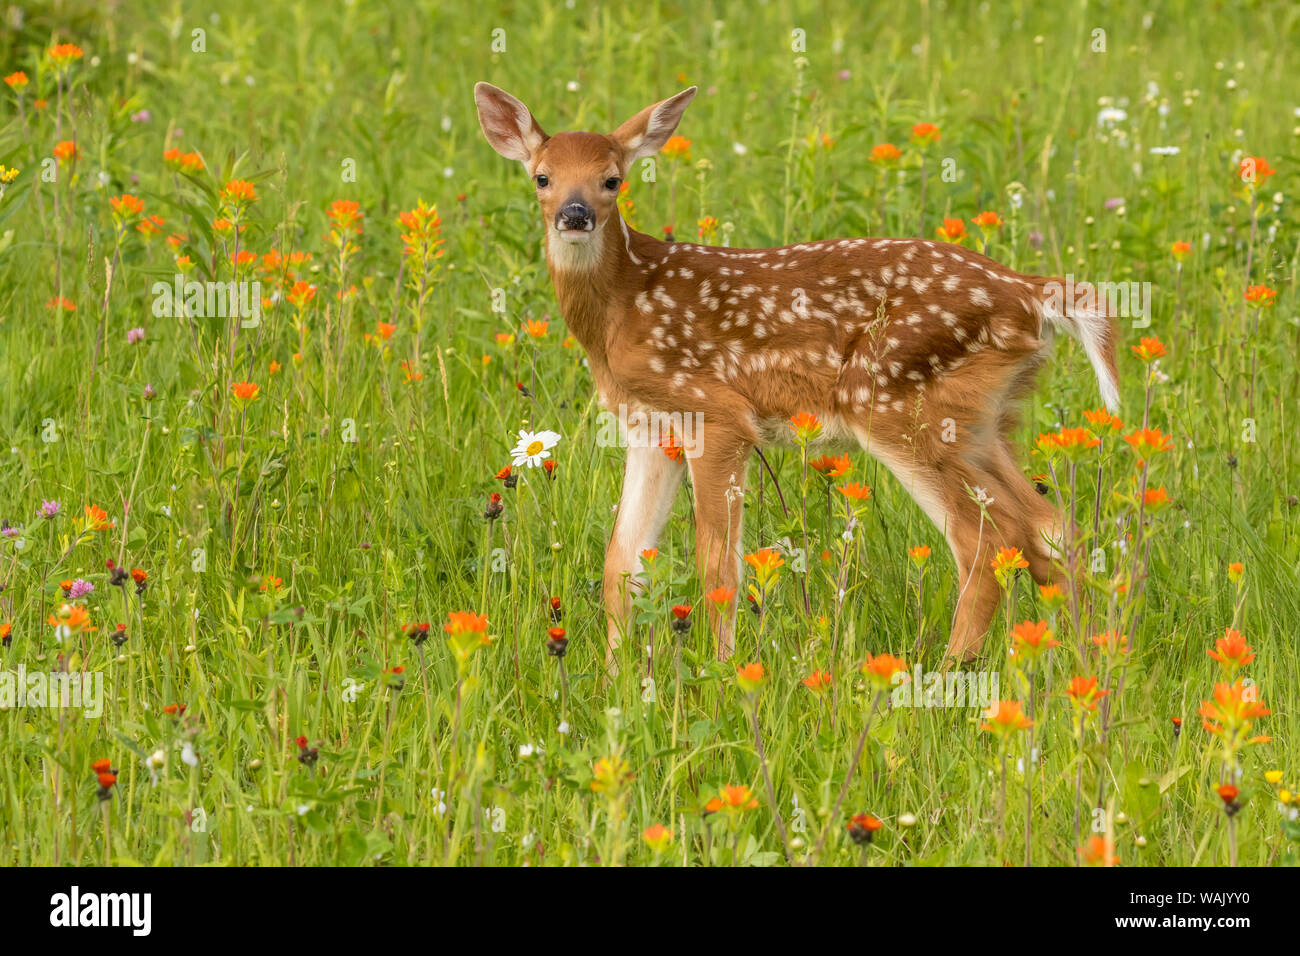 Pine County. Captive fawn. Credit as: Cathy and Gordon Illg / Jaynes Gallery / DanitaDelimont.com Stock Photo